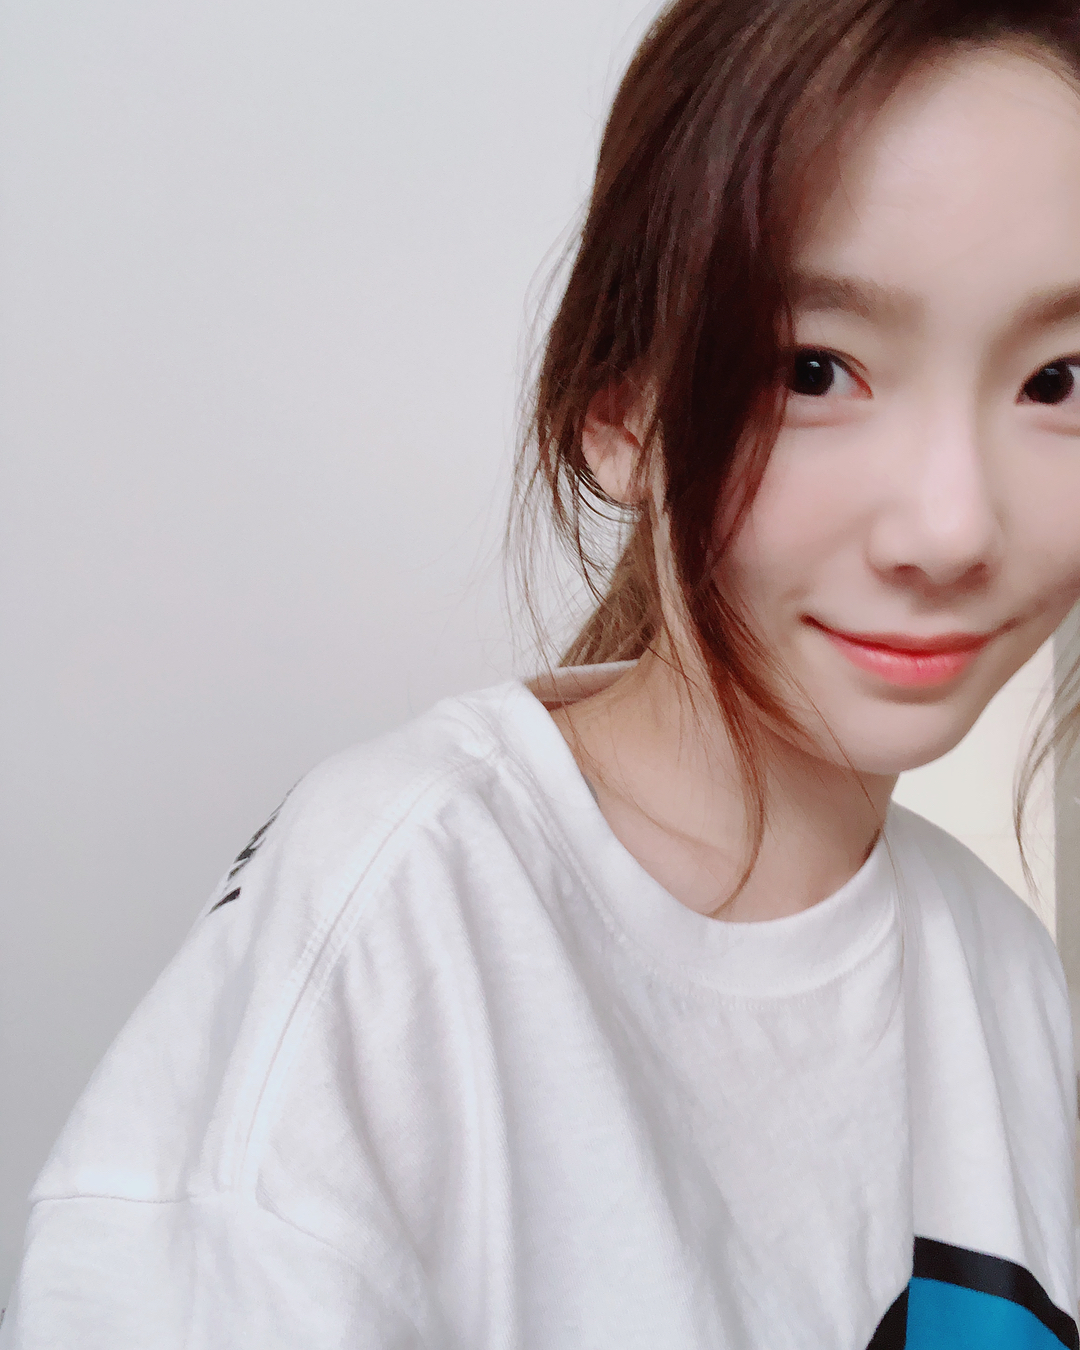 See the adorable selfies from SNSD TaeYeon! - Wonderful Generation